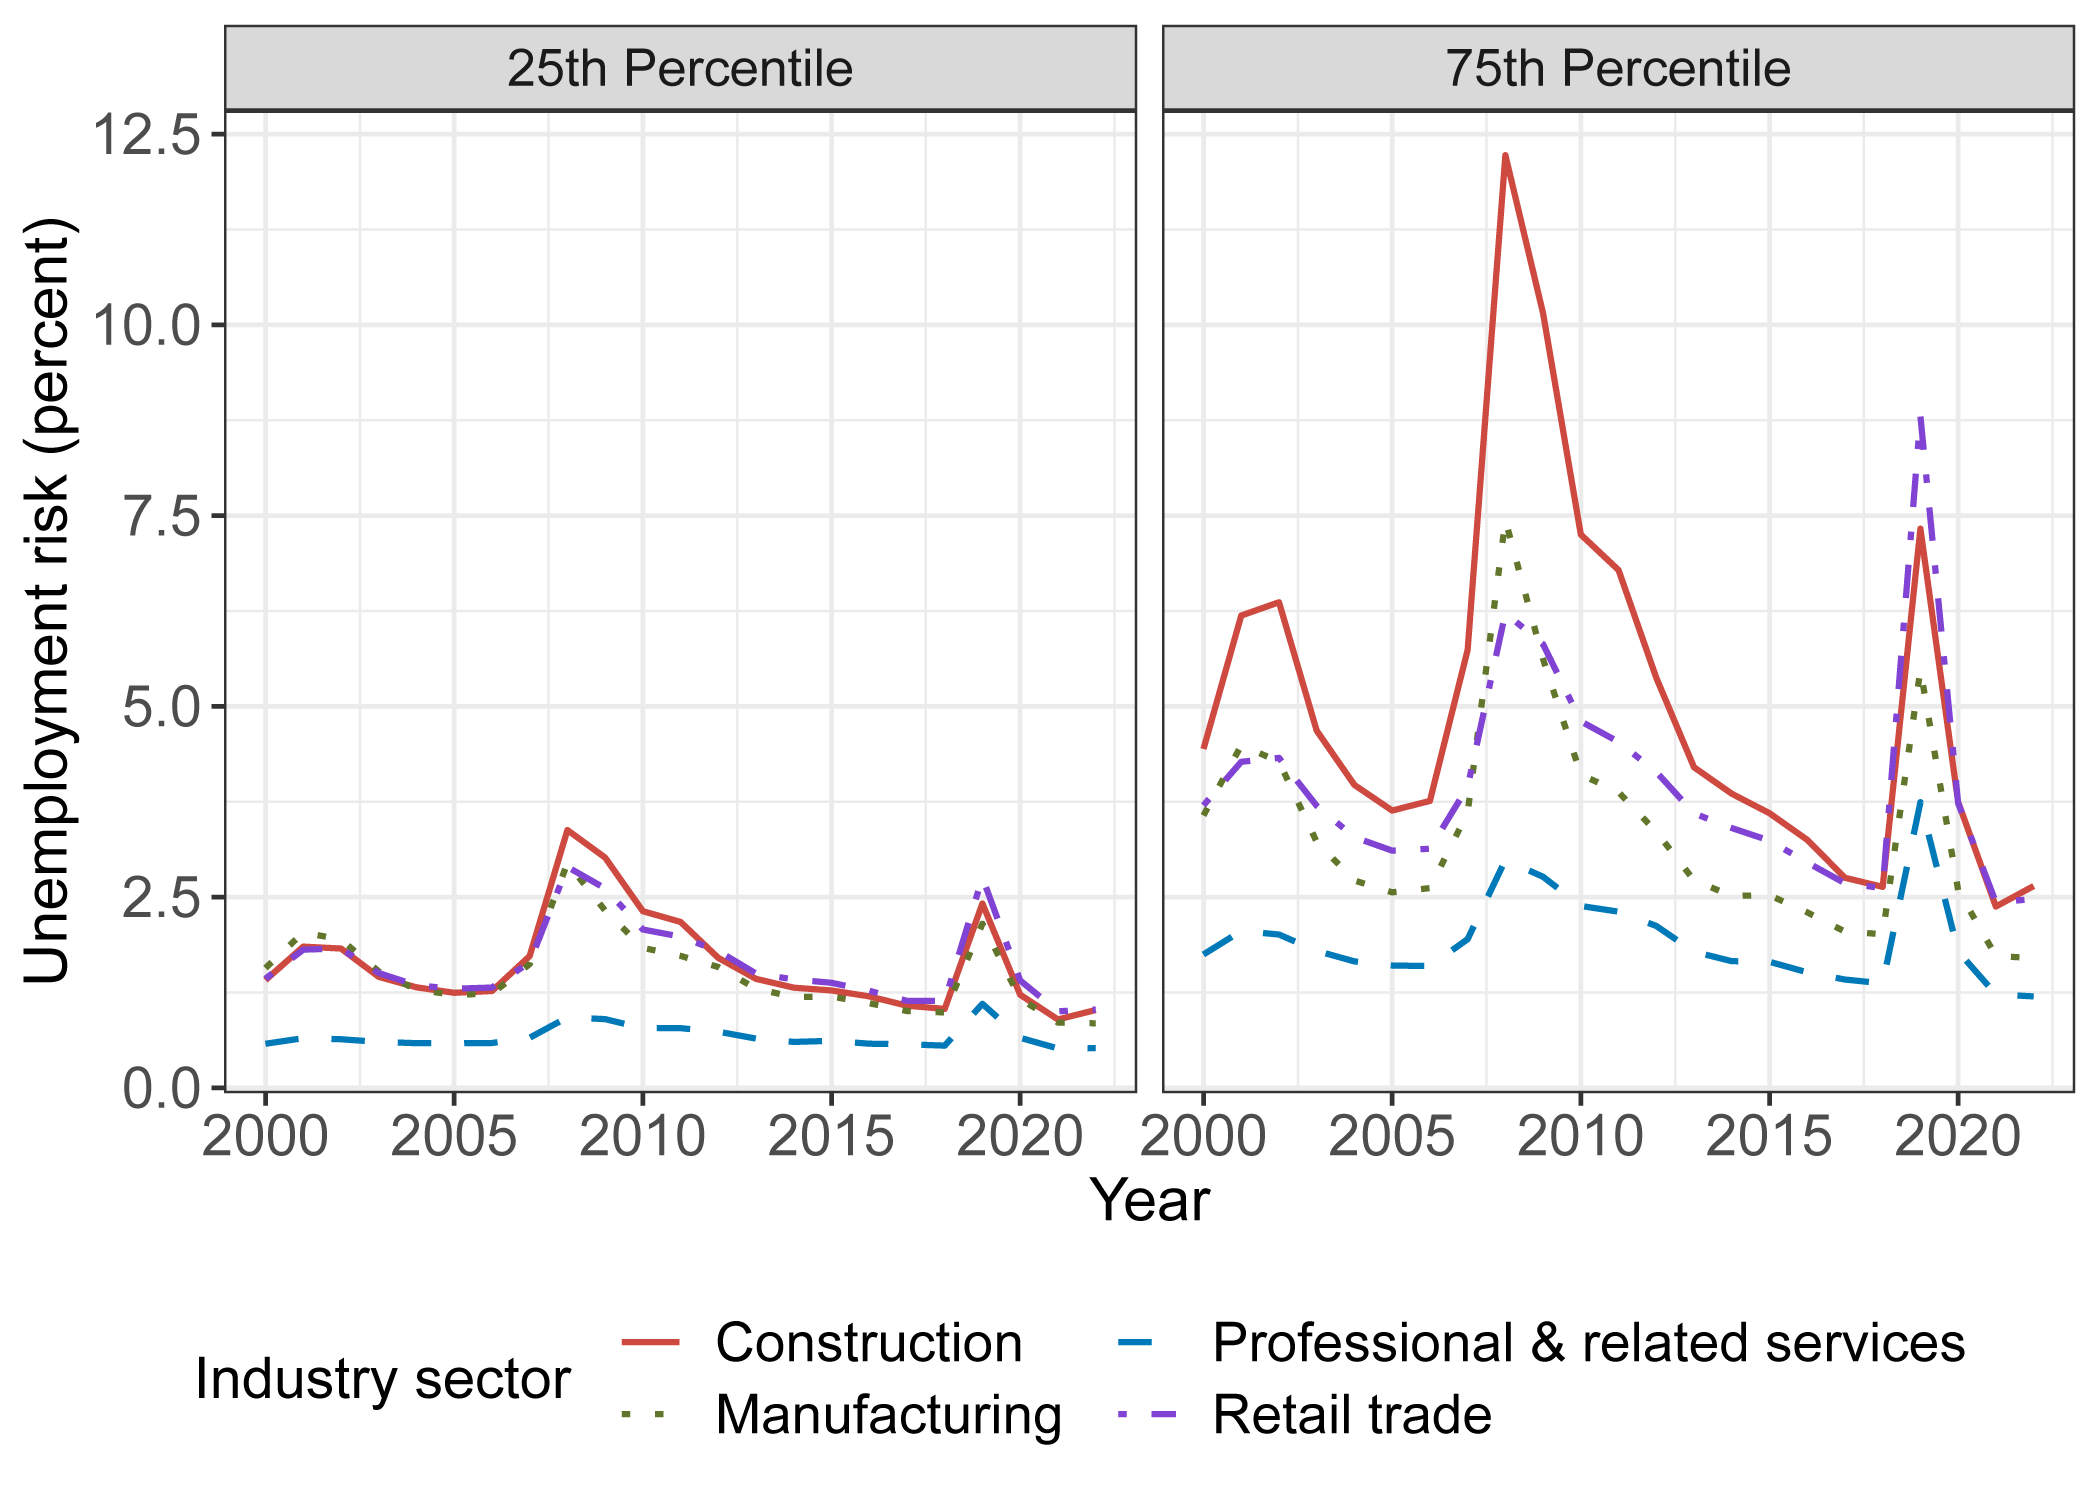 Figure 5. Industry heterogeneity in the distribution of unemployment risk over time. See accessible link for data.